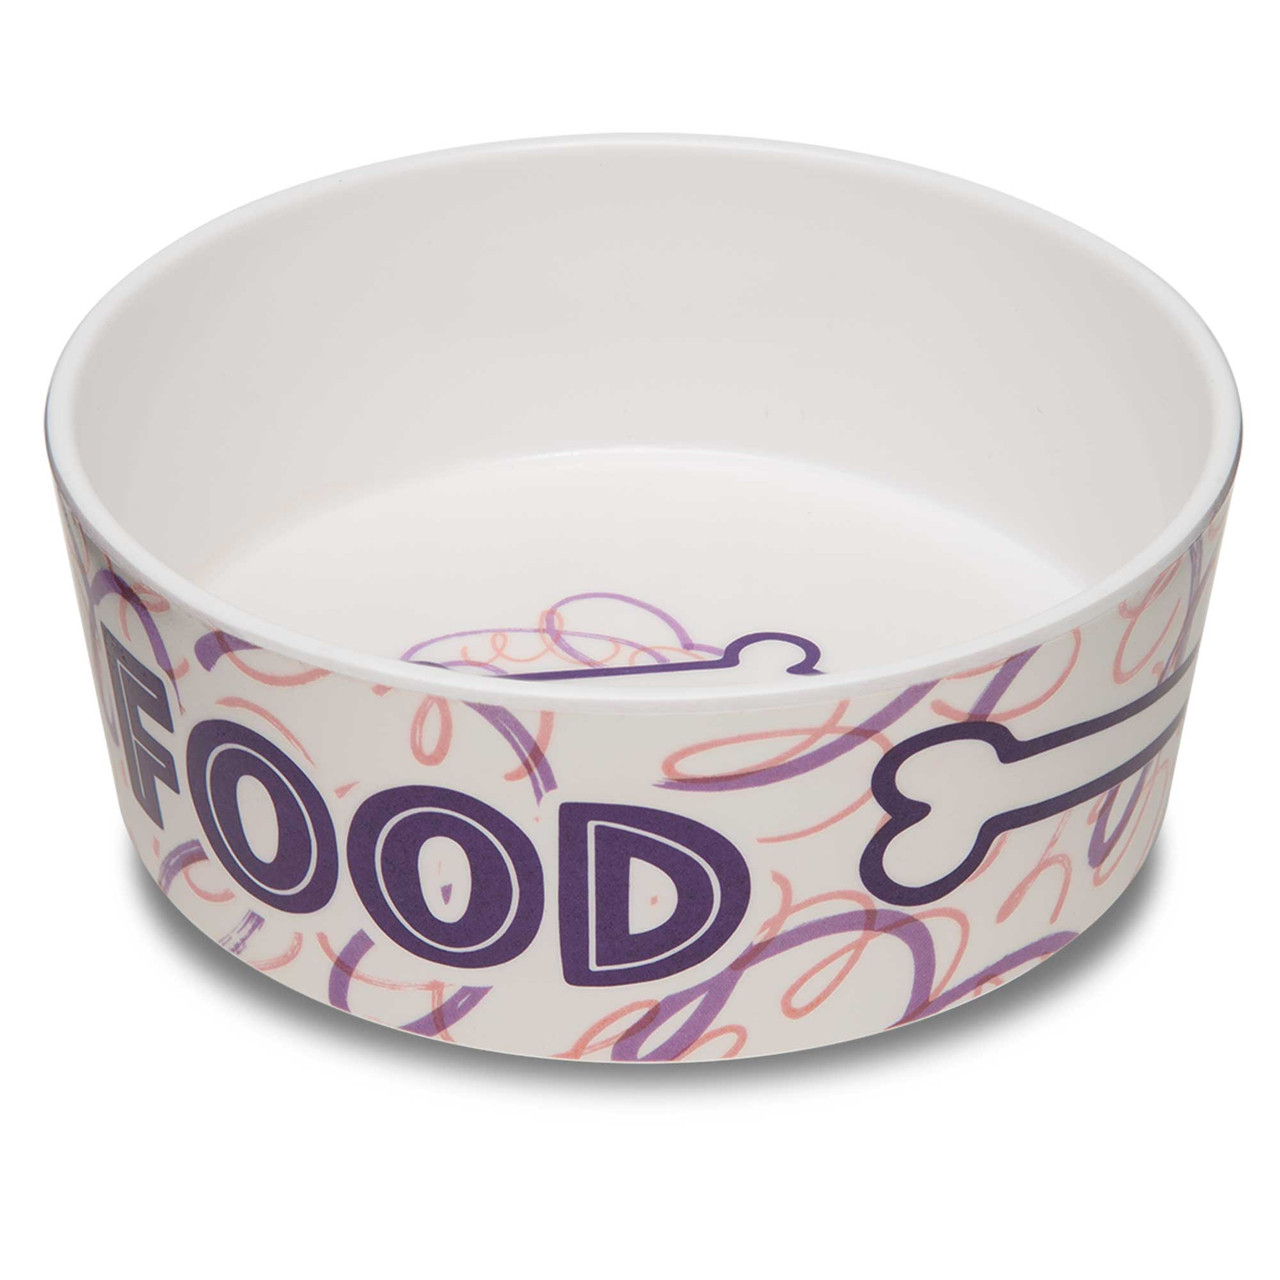 Dolce Food & Water Bowl - Large